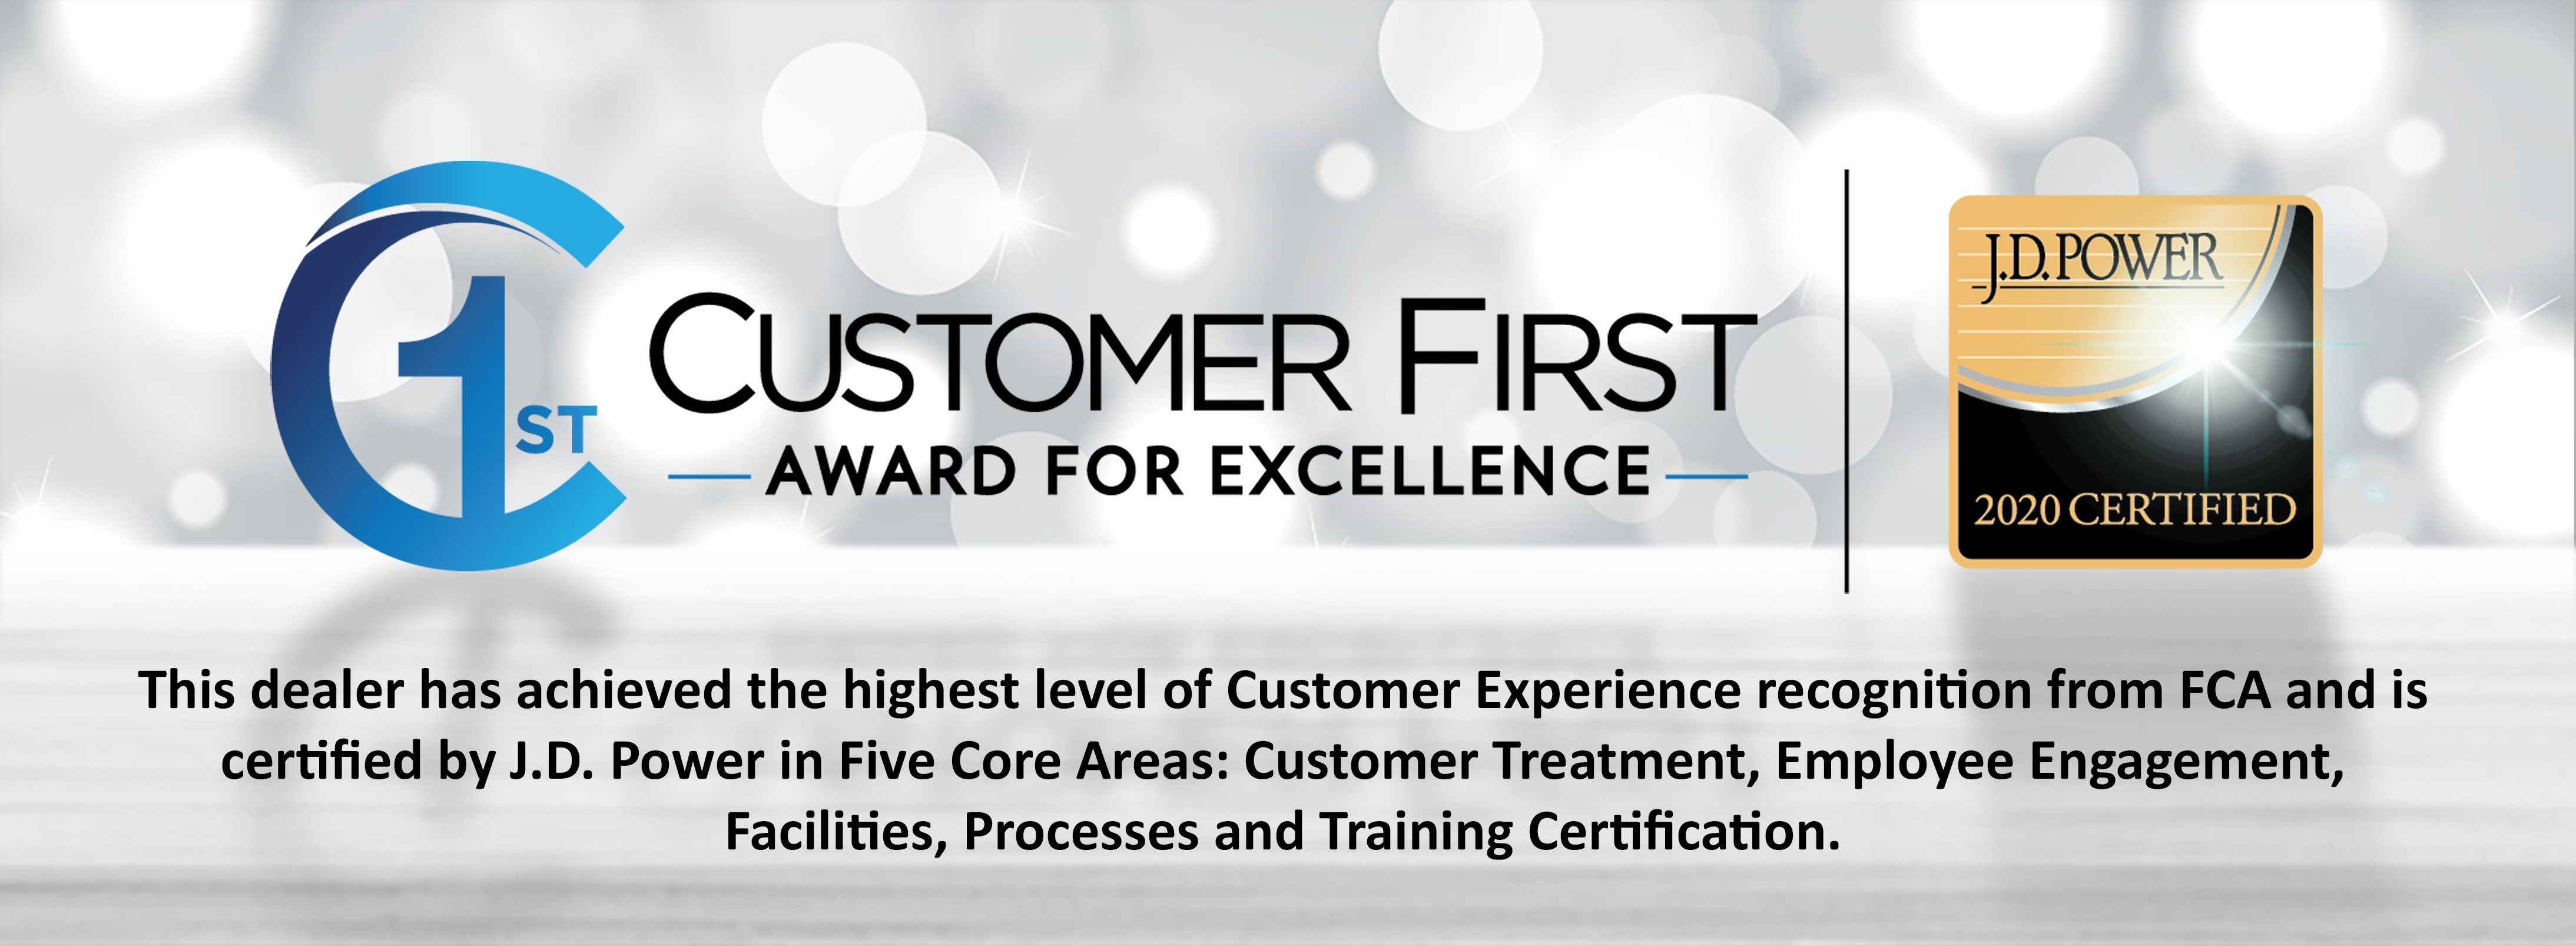 Customer First Award for Excellence for 2019 at Paul Cole Motors Inc. in Fostoria, OH